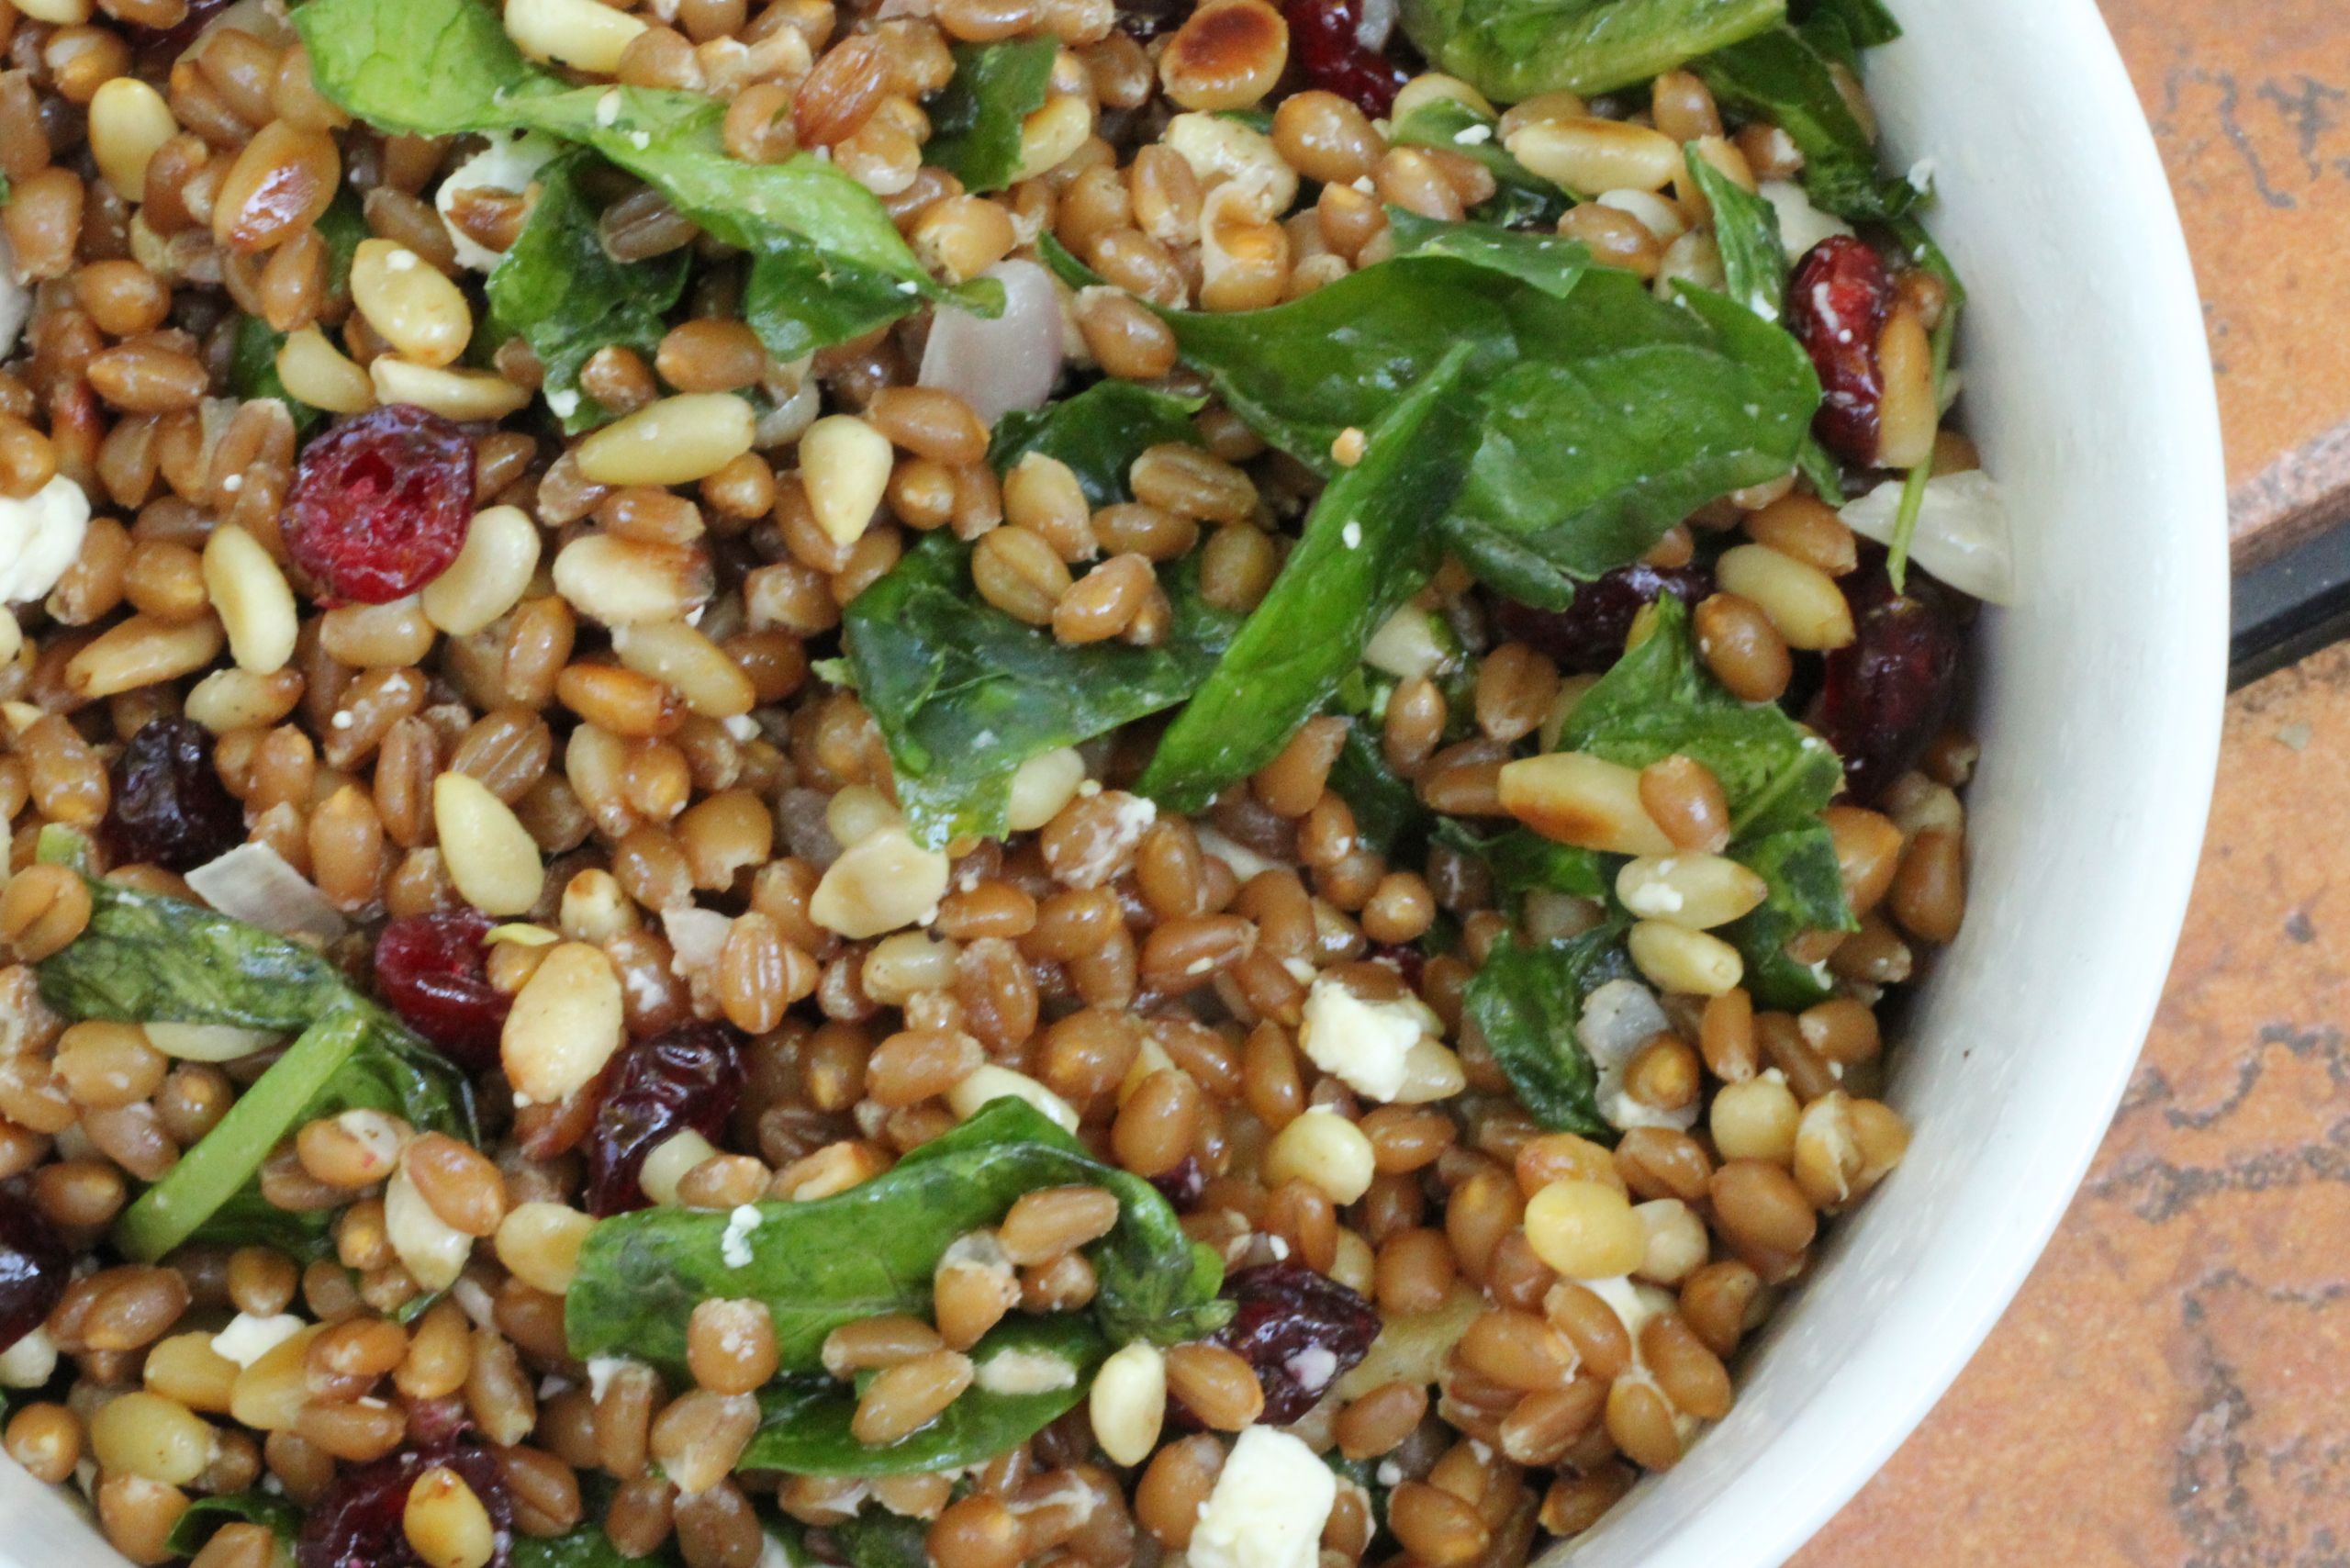 Wheat Berry Salad Recipes
 Citrus Wheat Berry Salad With Spinach and Pine Nuts